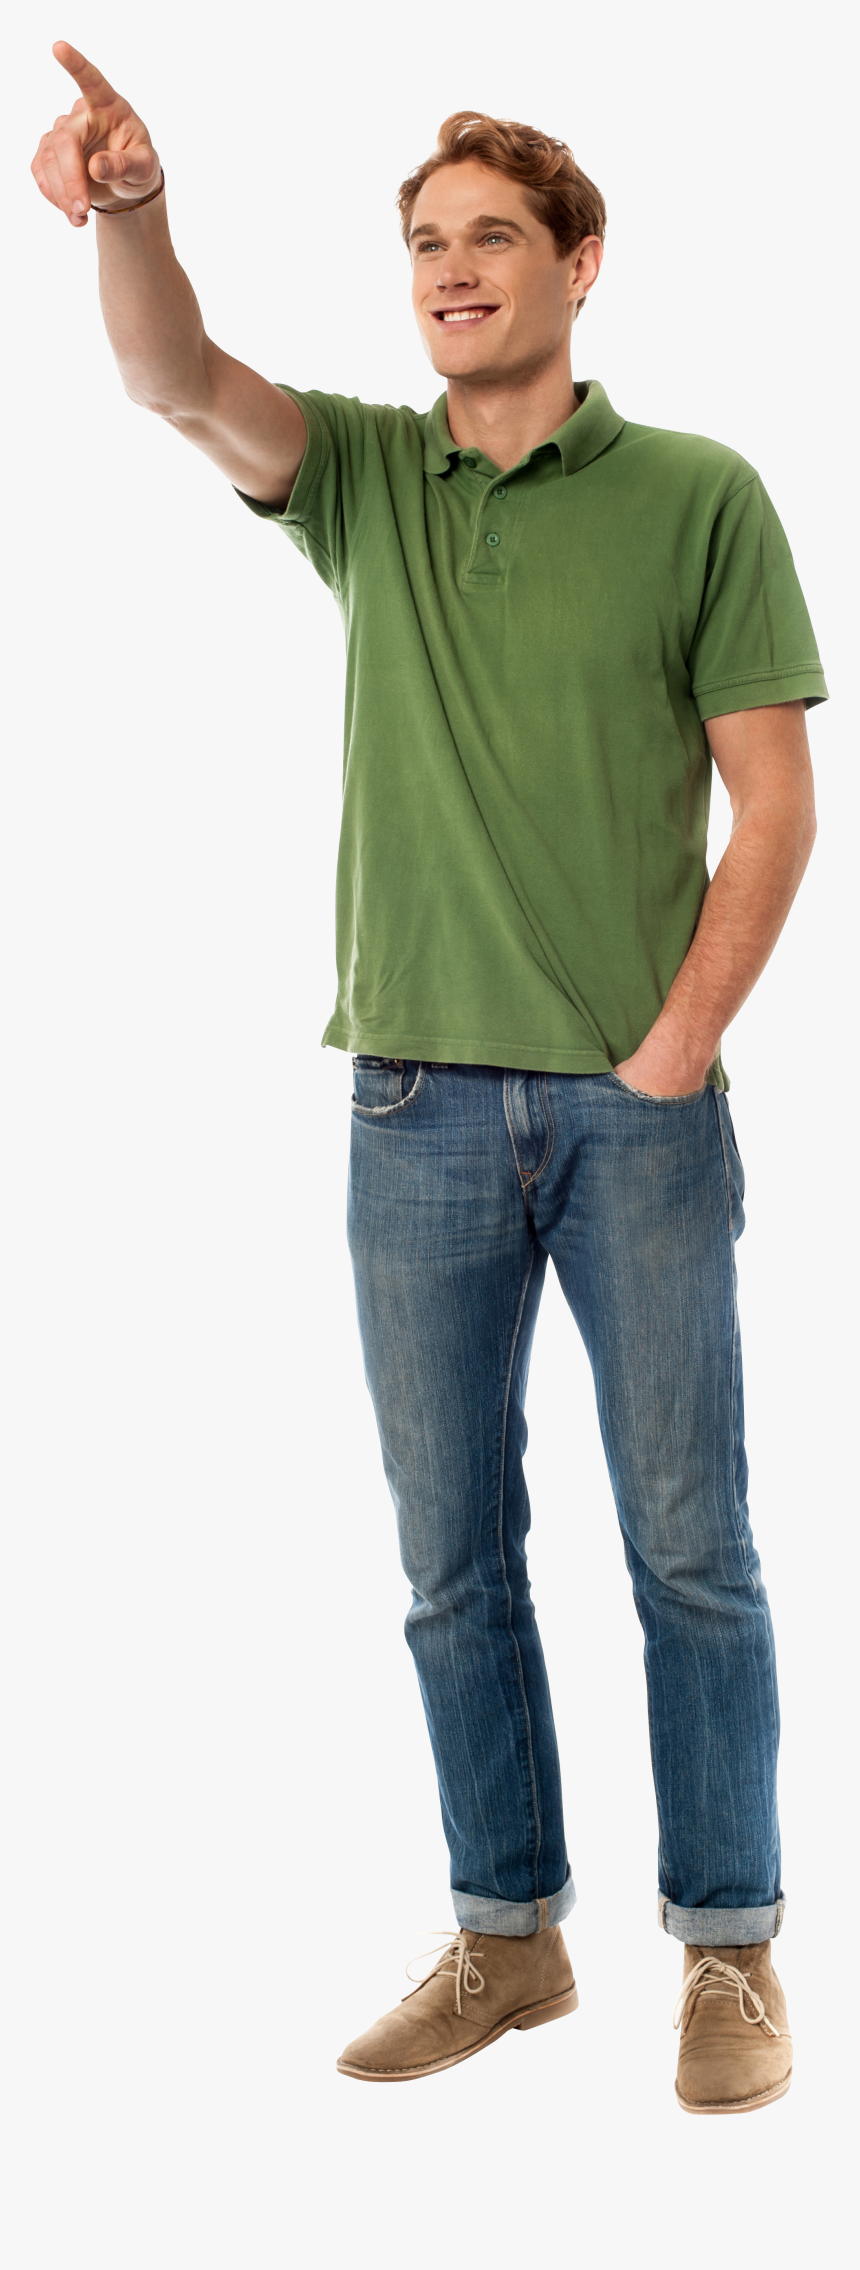 Pointing People Cutout Png, Transparent Png, Free Download